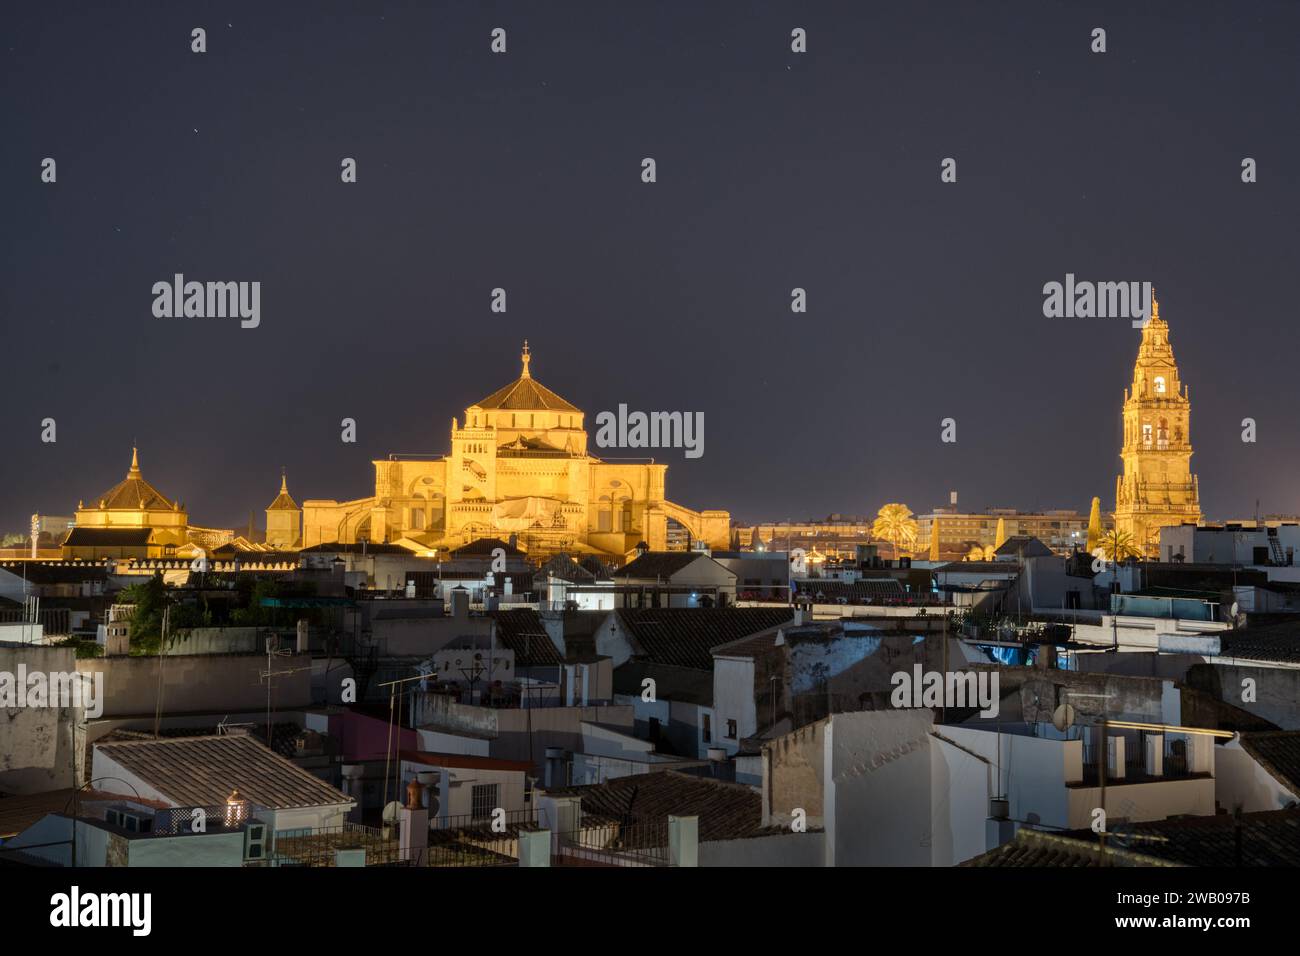 Illuminated skyline of the Mezquita Cathedral of Cordoba, Spain at night Stock Photo